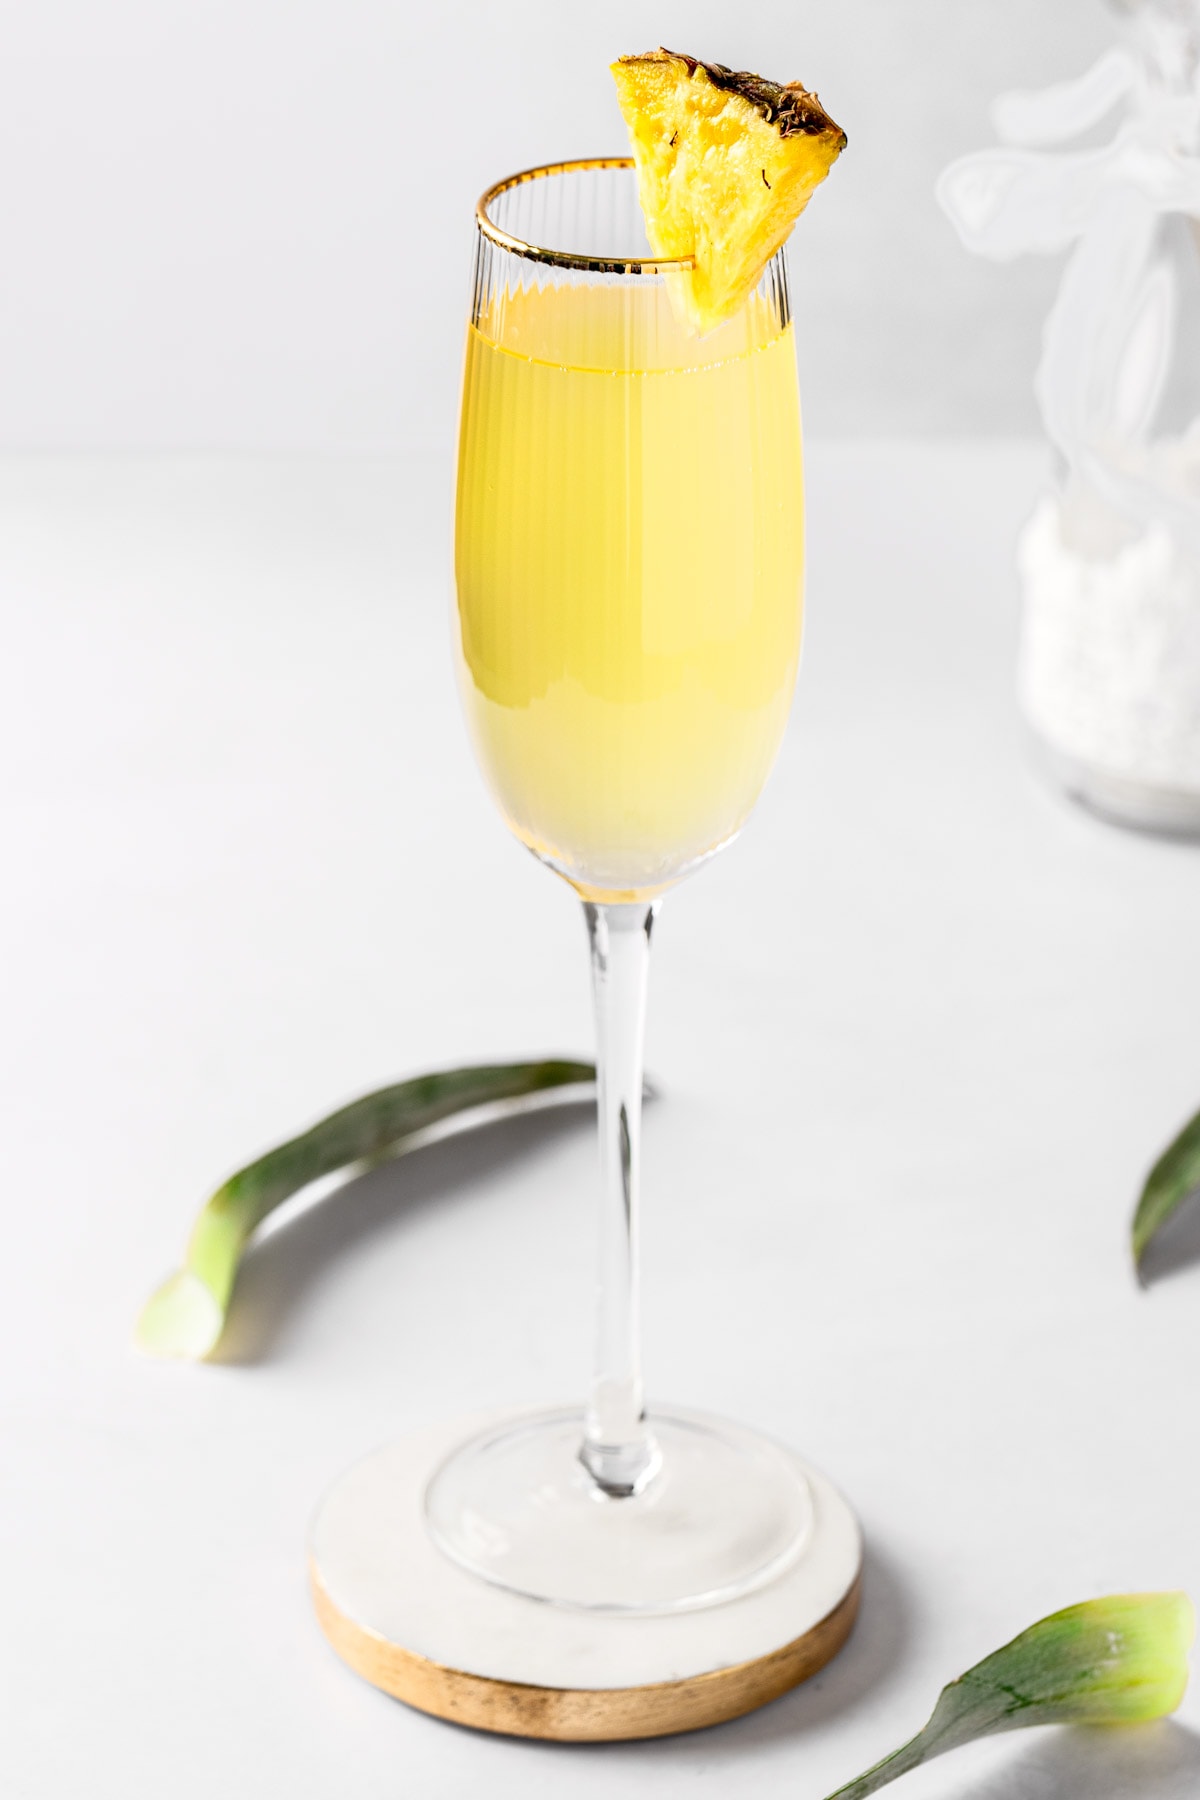 A pineapple mimosa garnished with a pineapple slice, on a white background.